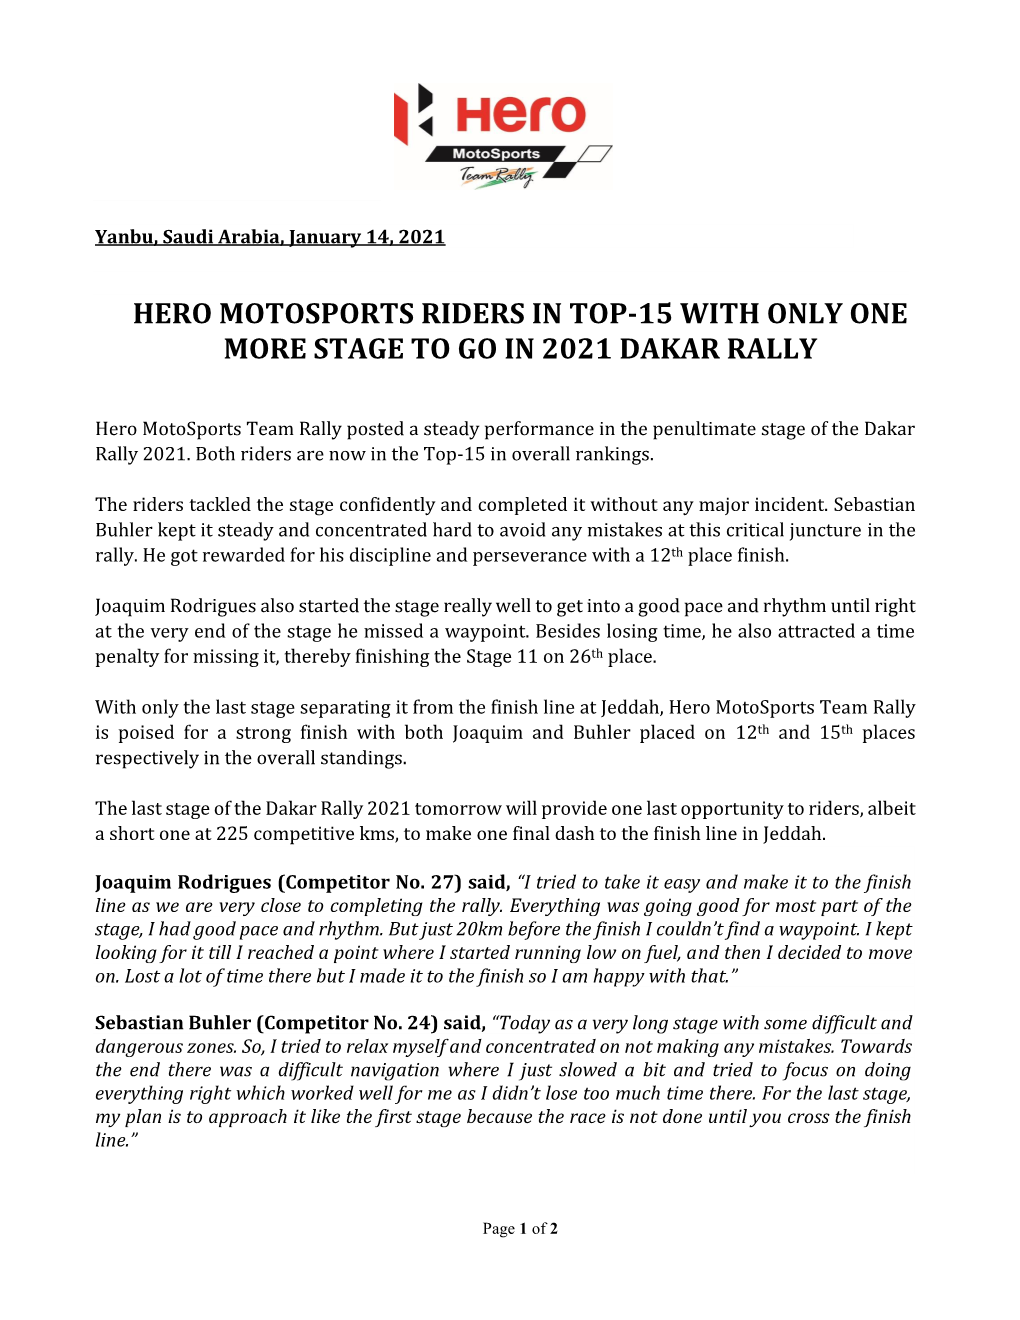 Hero Motosports Riders in Top-15 with Only One More Stage to Go in 2021 Dakar Rally